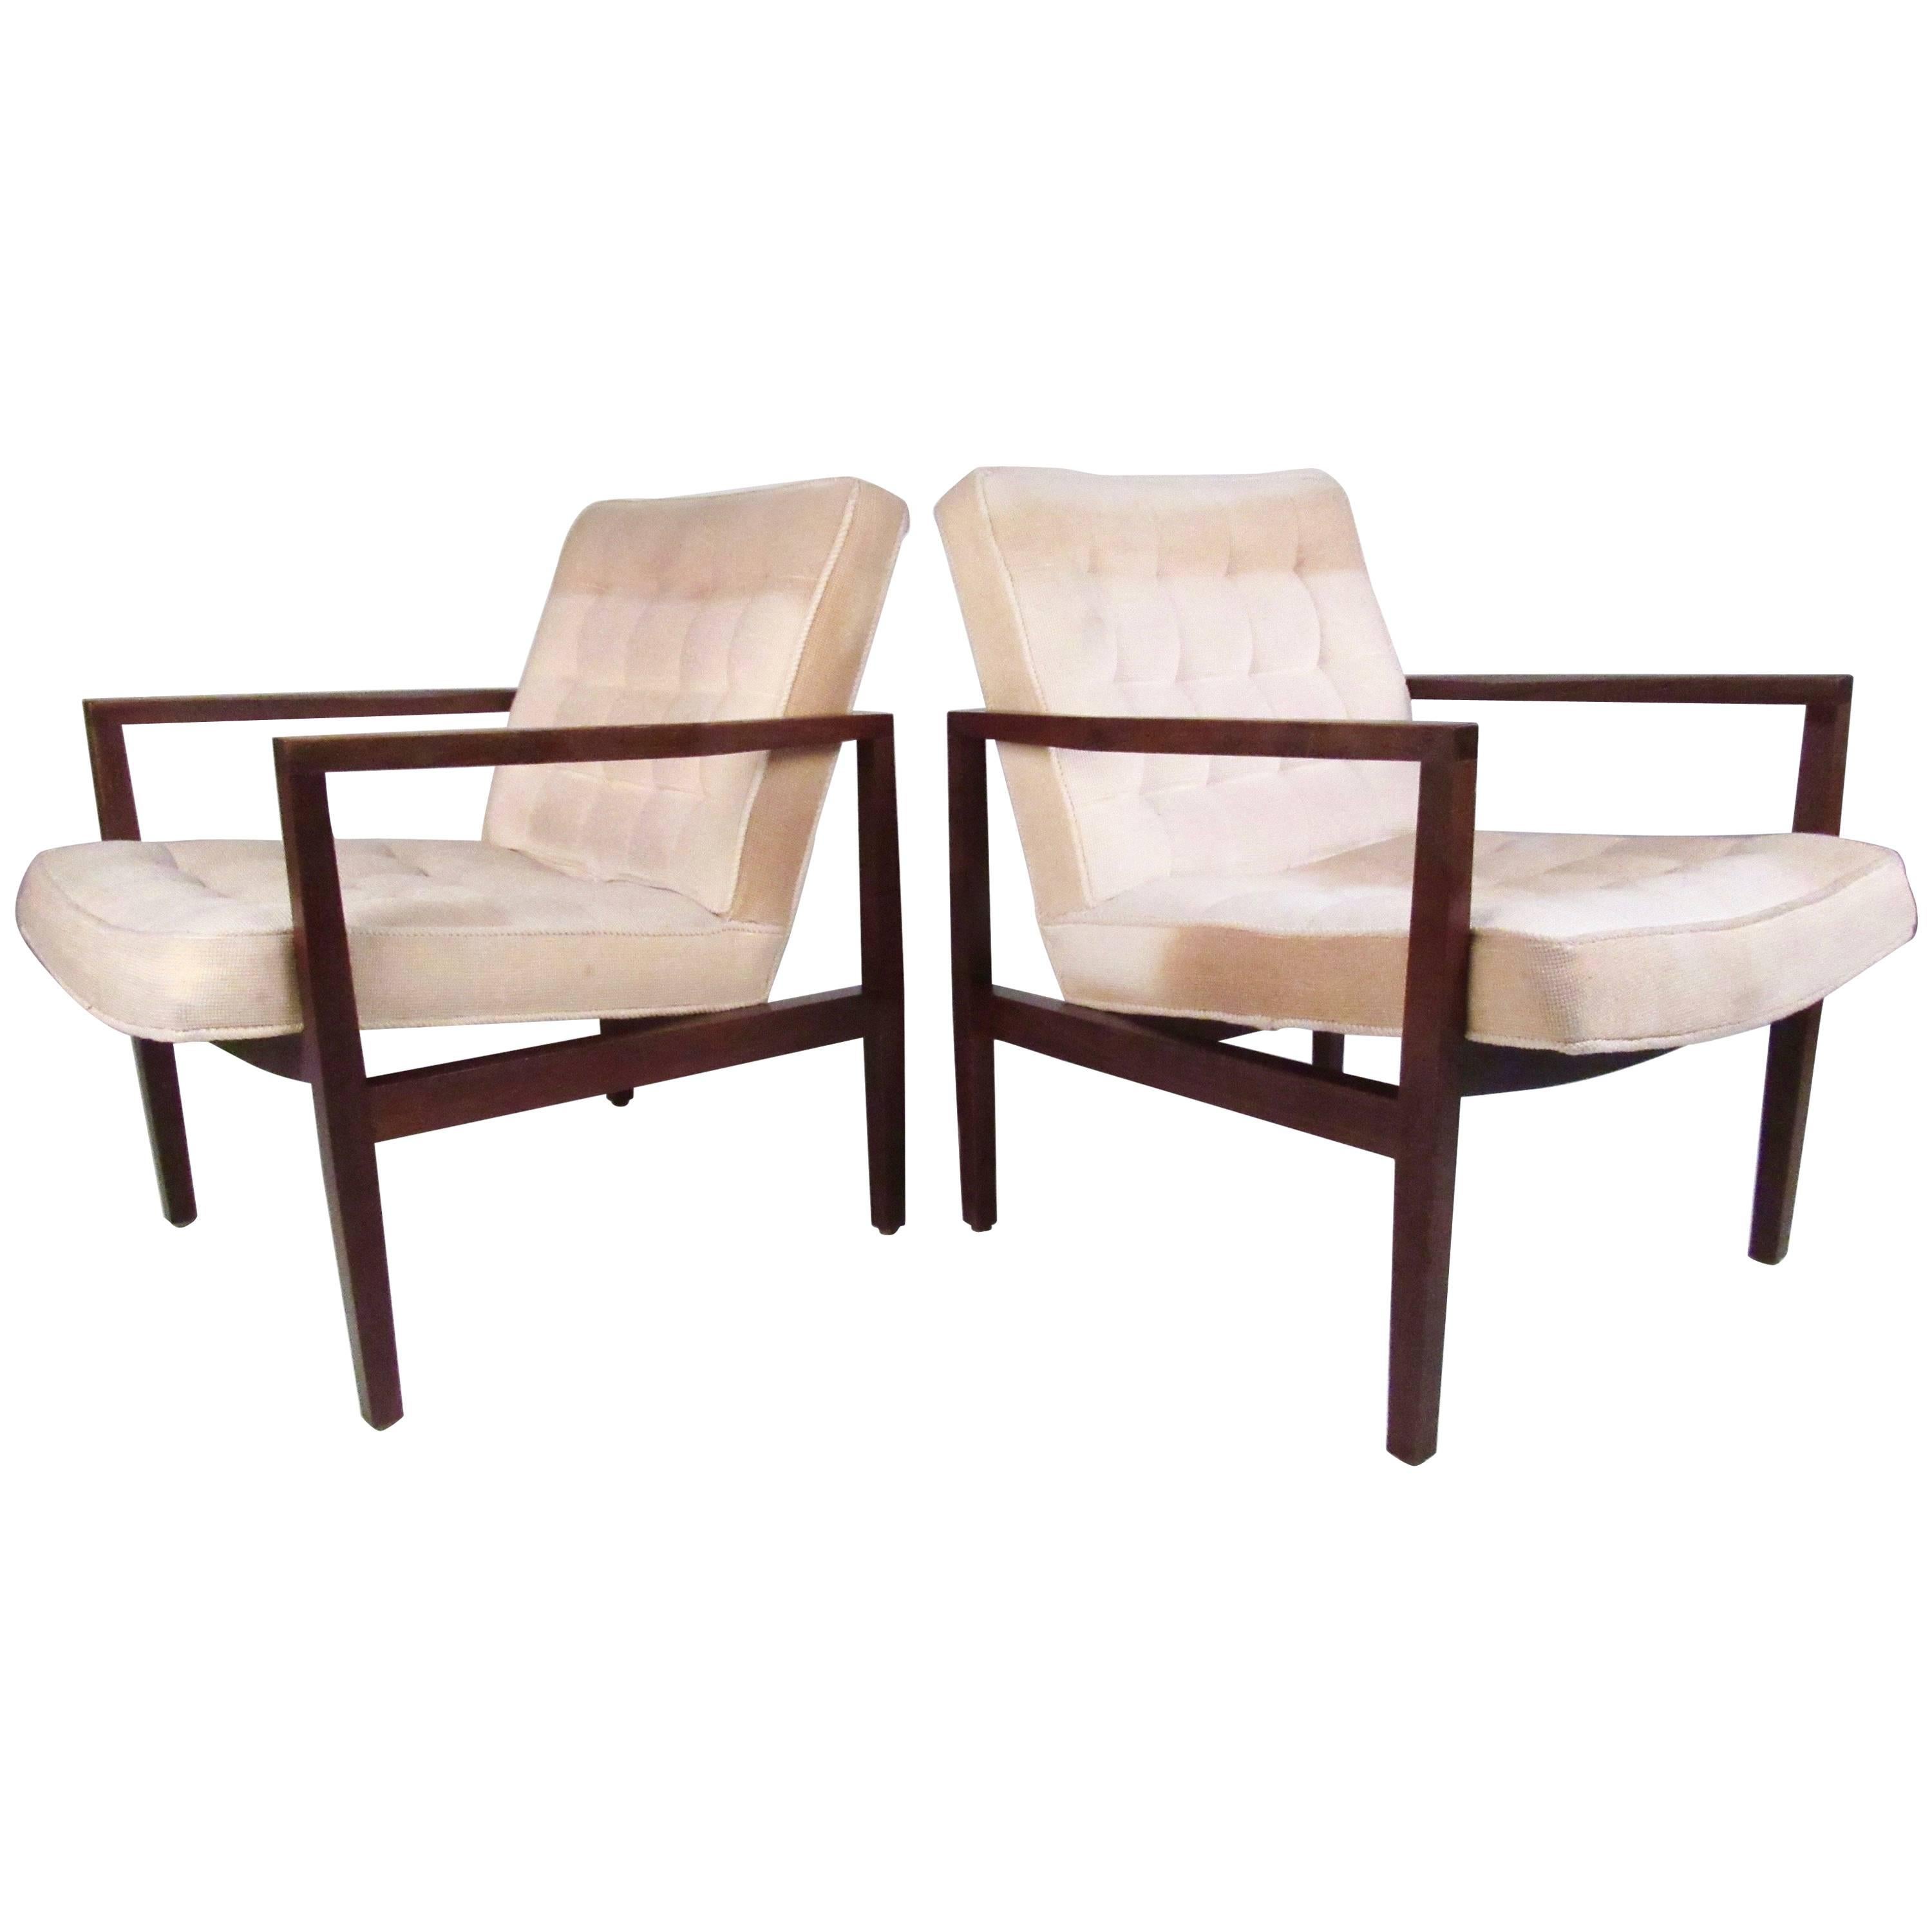 Stylish Pair of Midcentury Knoll Style Lounge Chairs